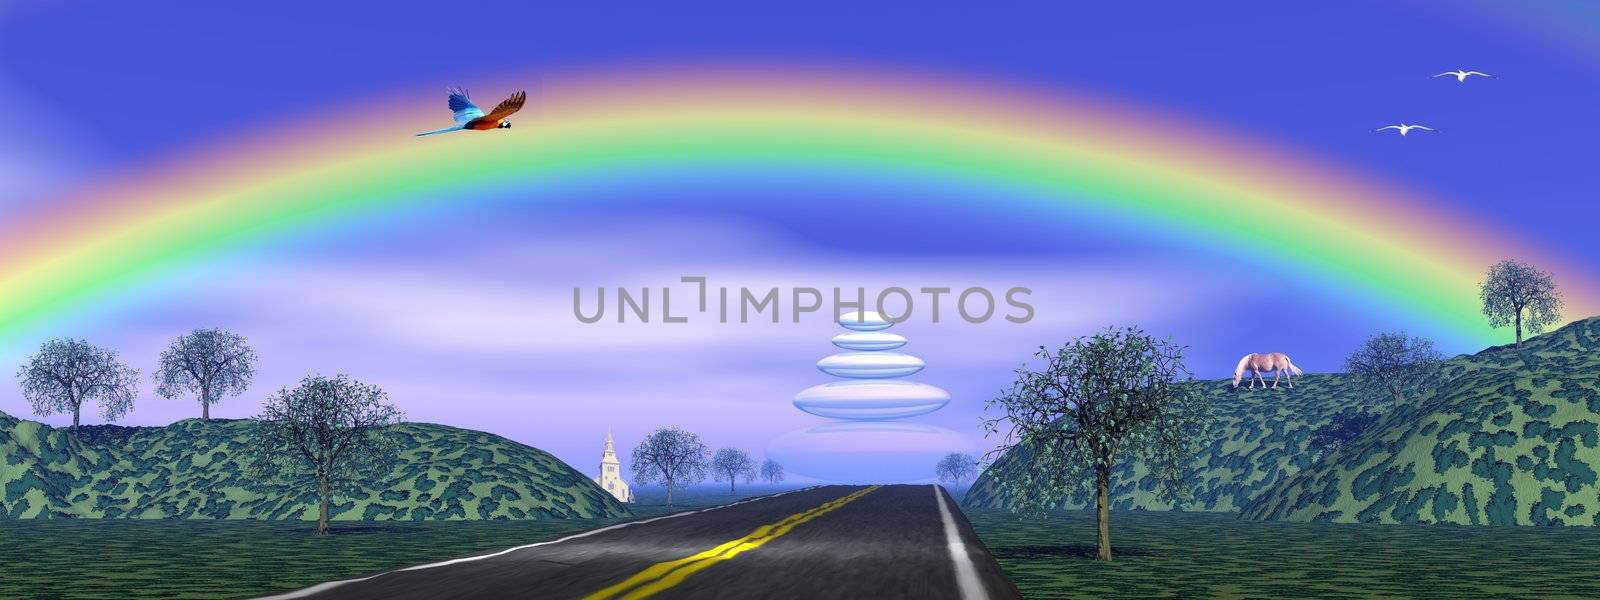 Road in the nature among hills, trees and animals going to peace under rainbow